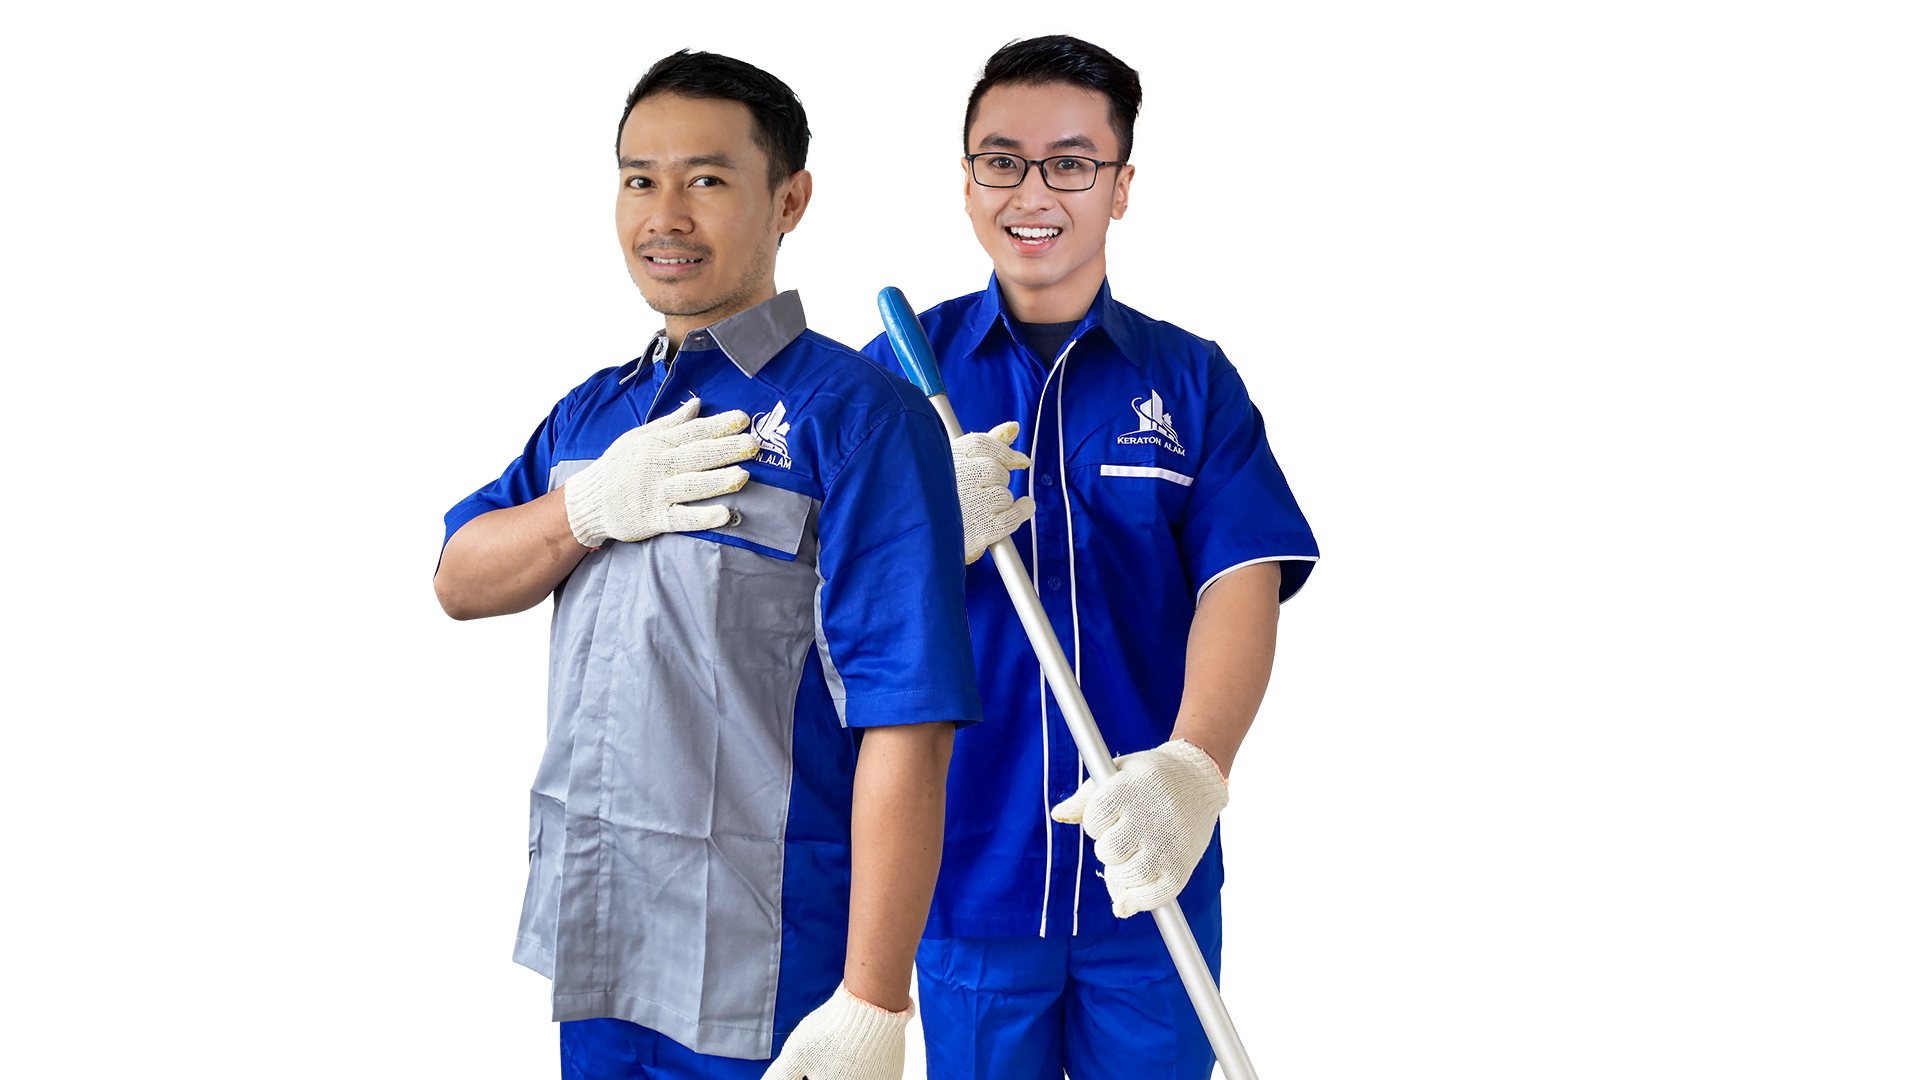 jasa cleaning service profesional